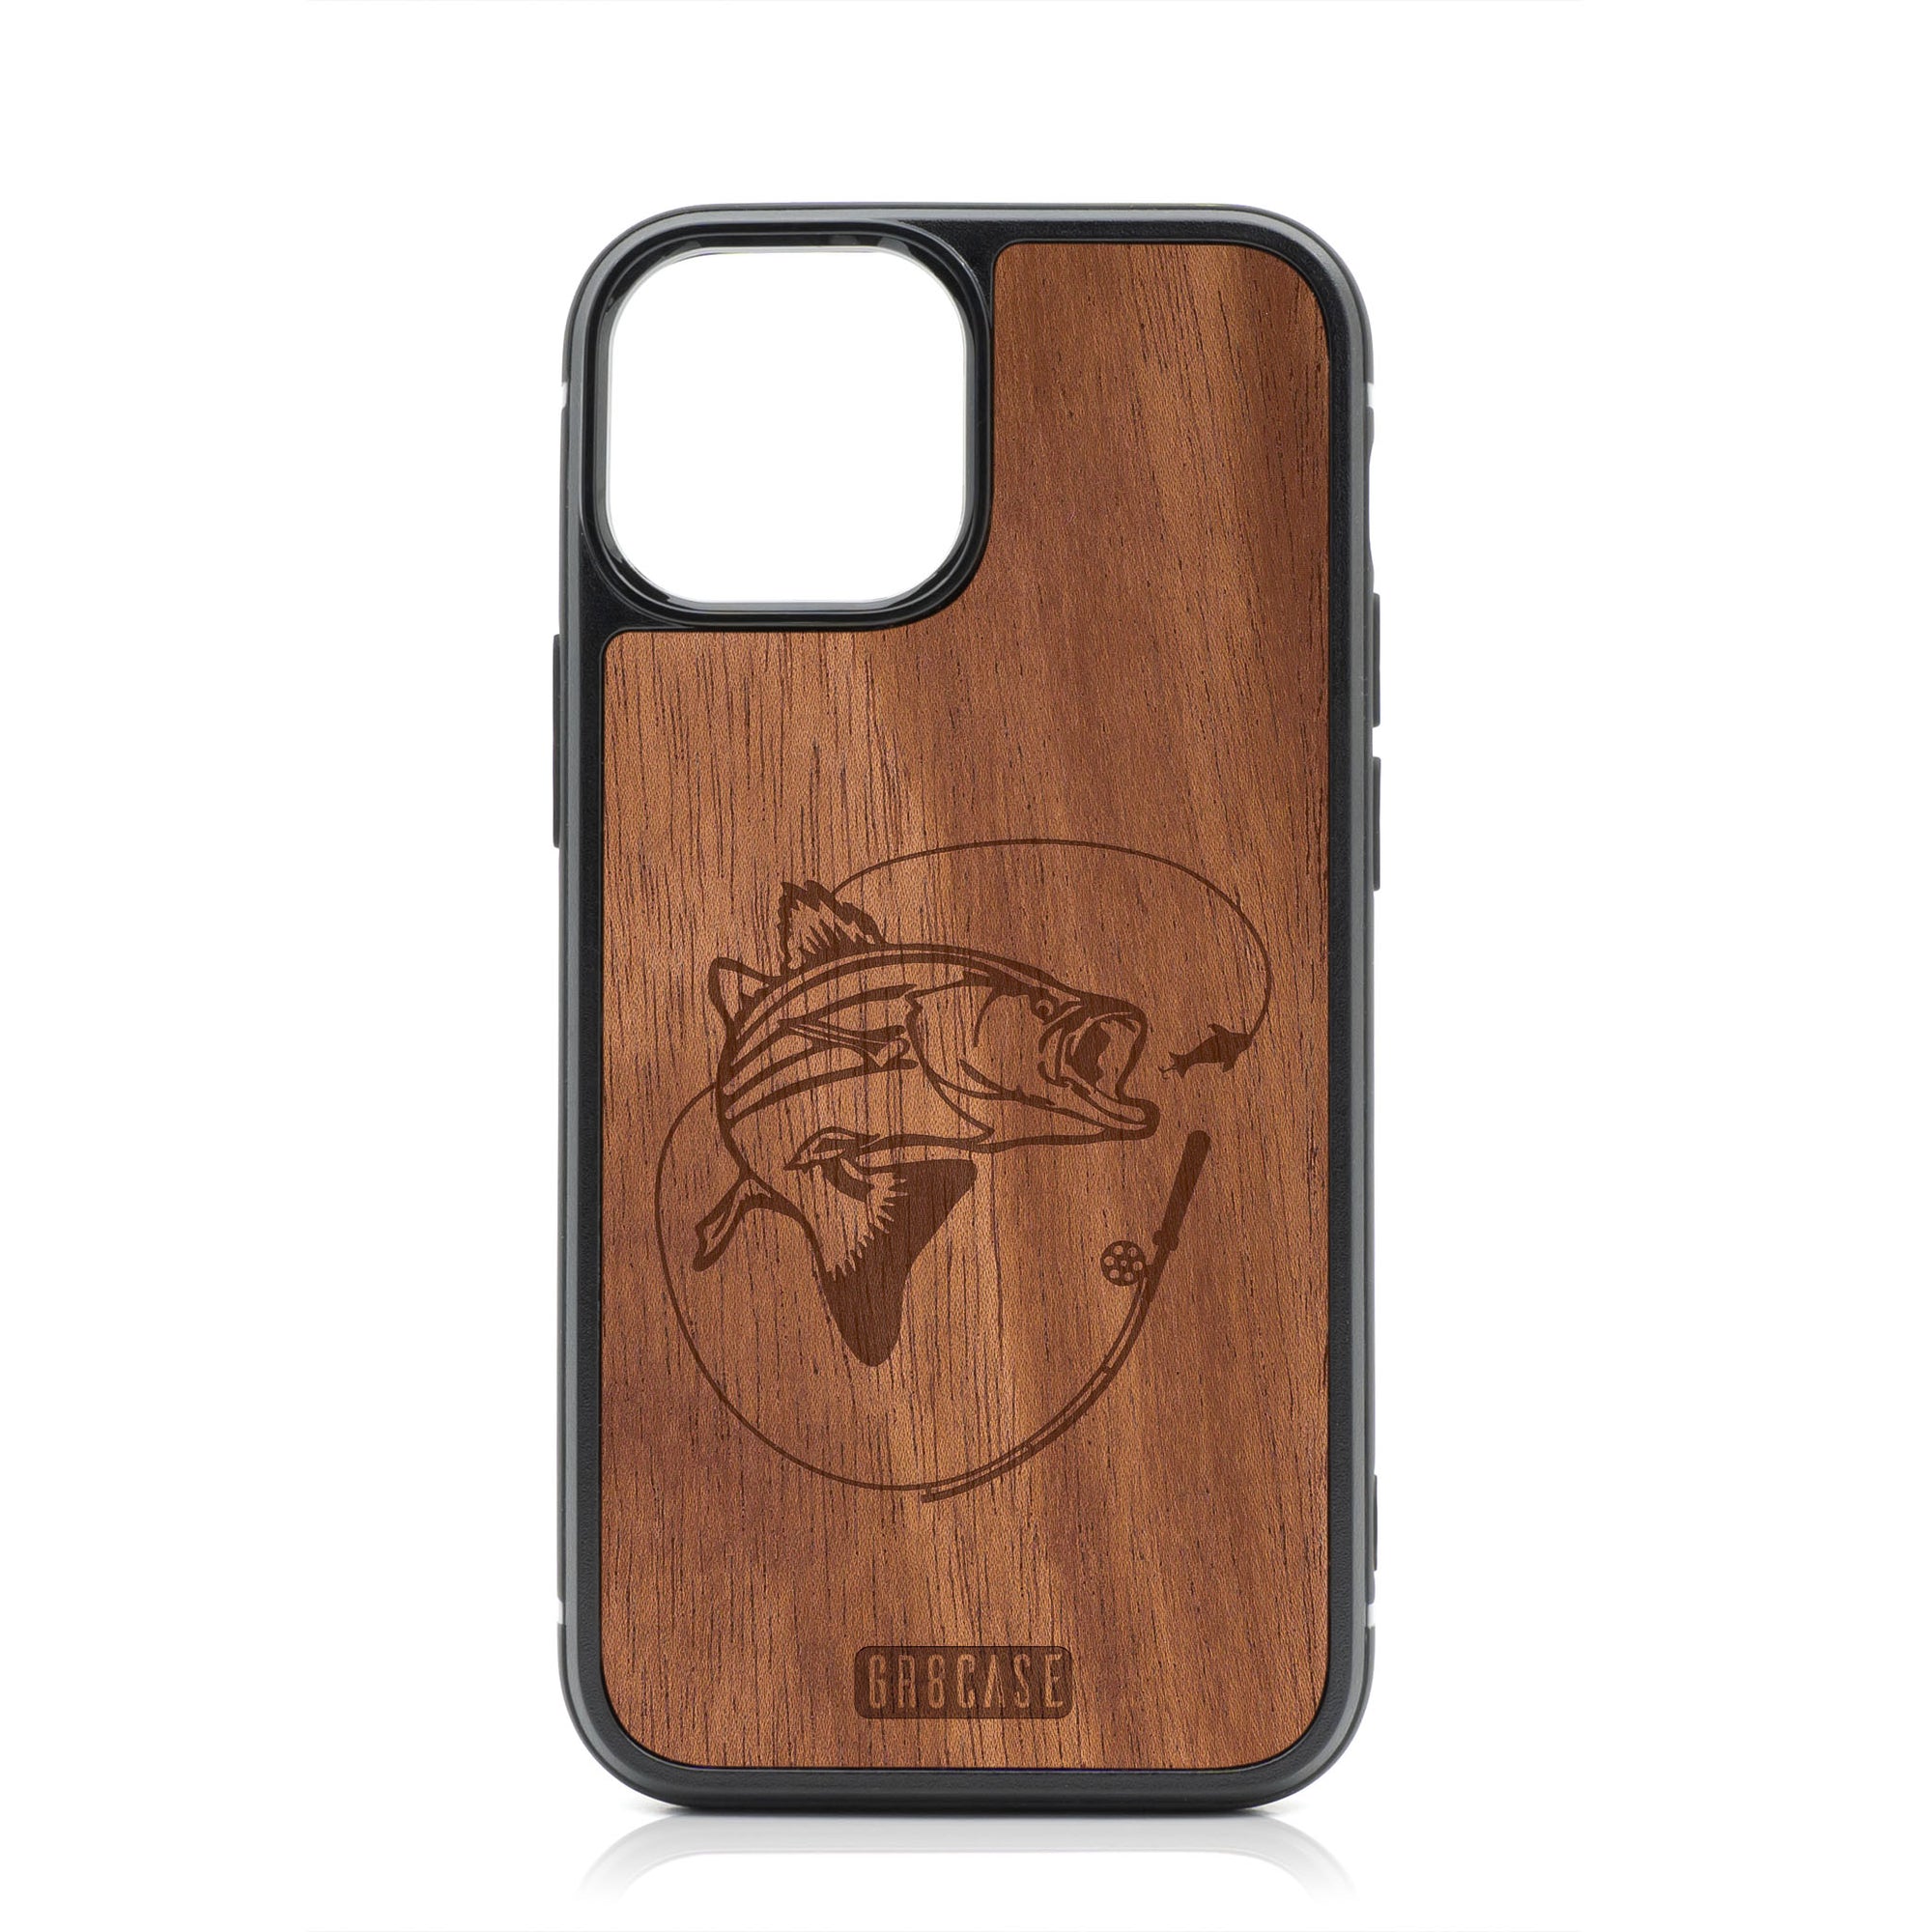 Fish and Reel Design Wood Case For iPhone 13 Mini